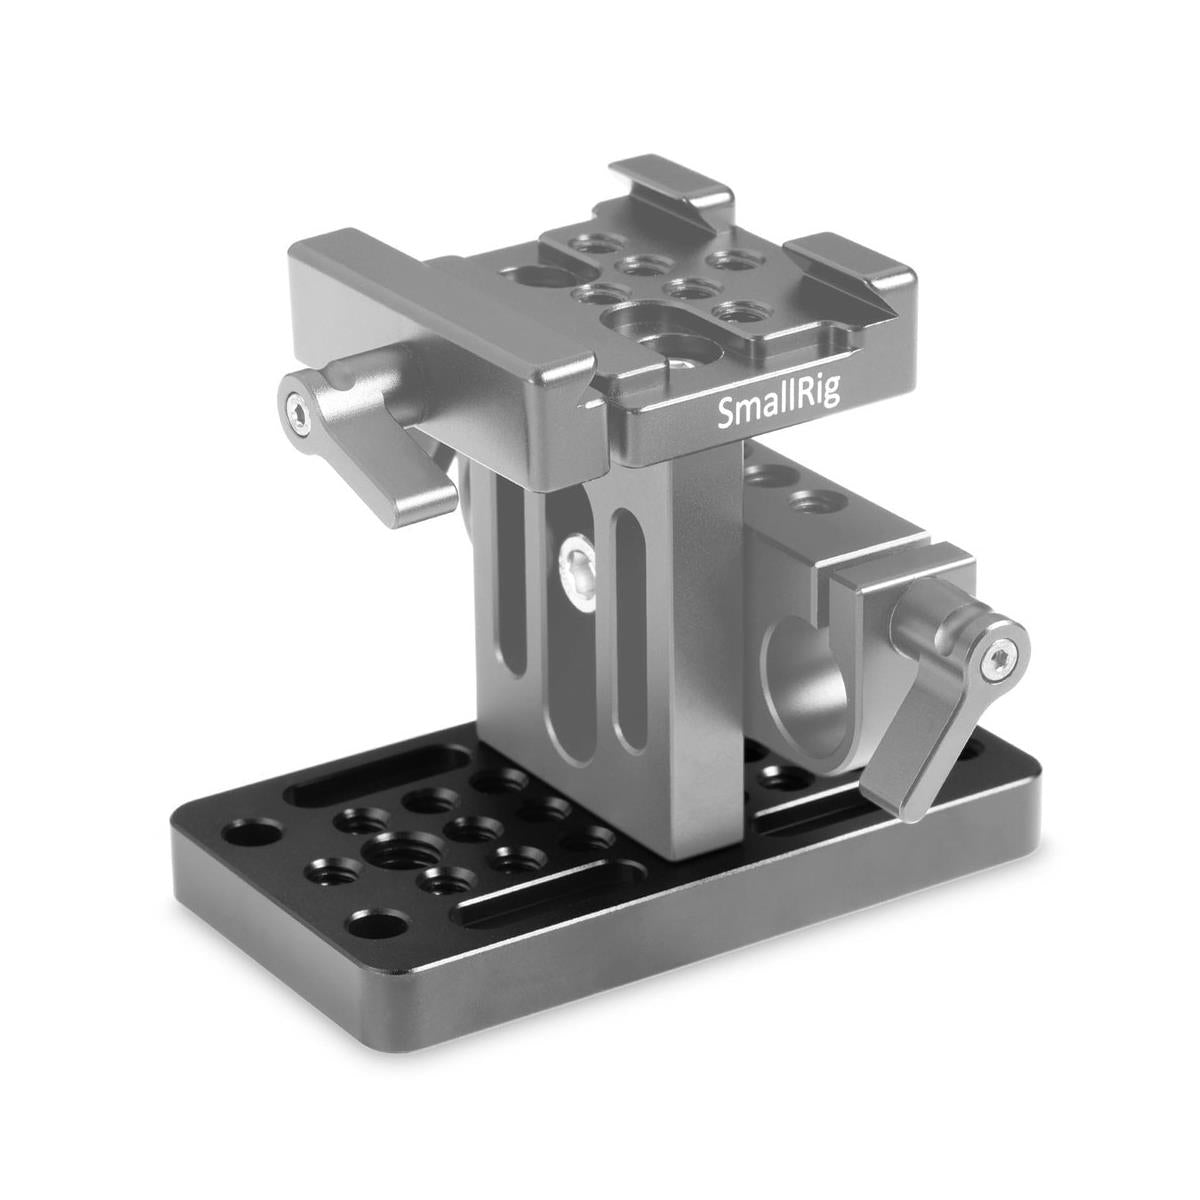 SmallRig Mounting Cheese Easy Plate for Railblocks, Dovetails and Short Rods - Model 1598